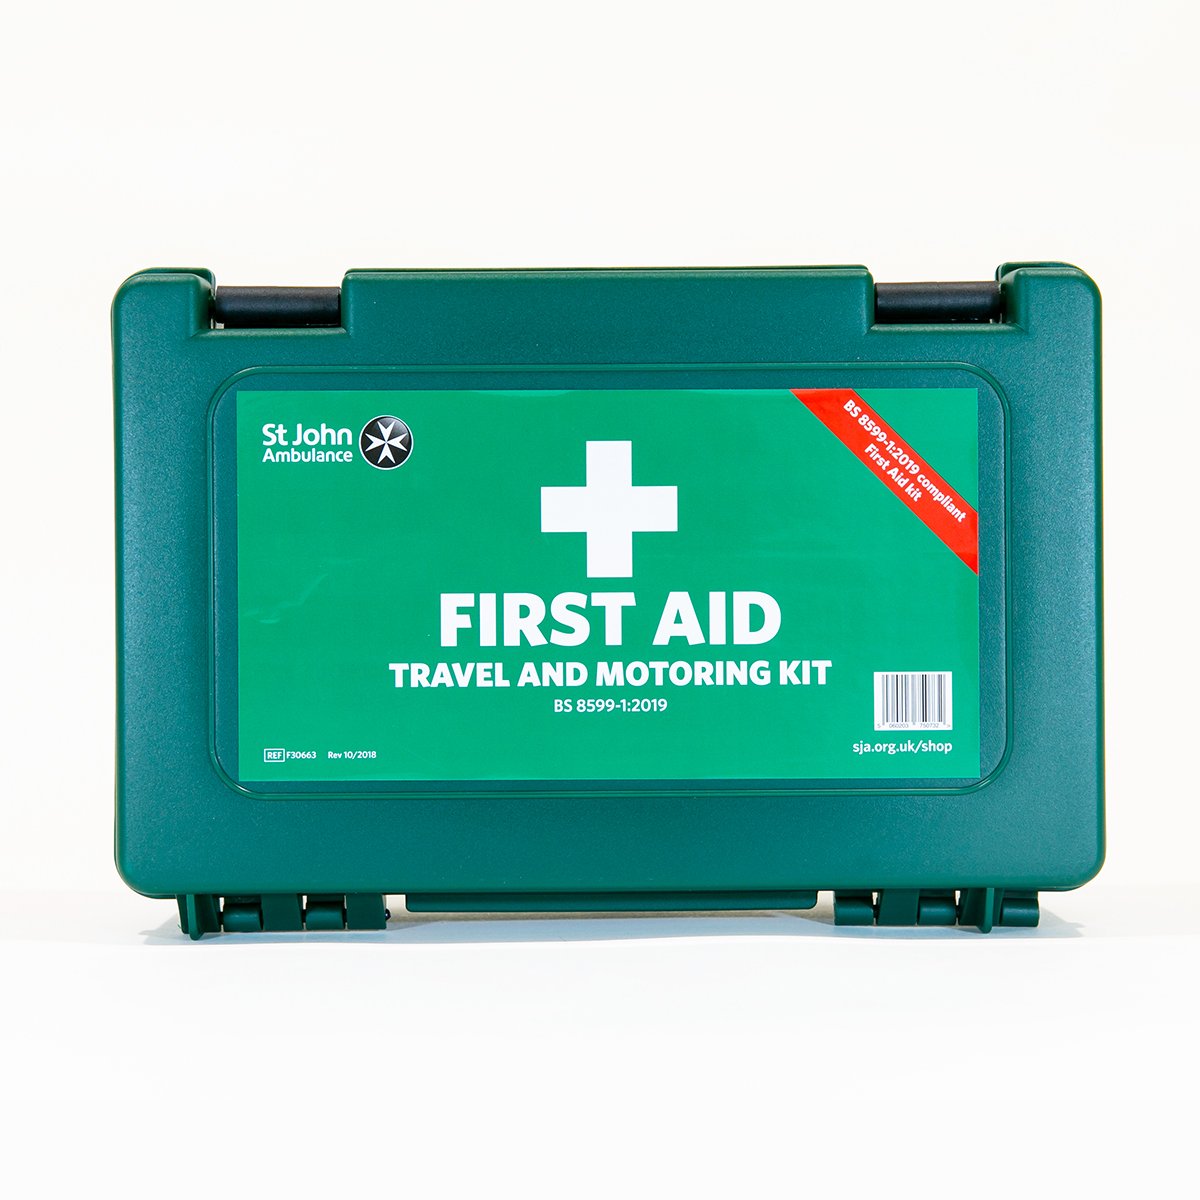 St John Ambulance Standard Travel and Motoring Workplace First Aid Kit BS 8599-1:2019